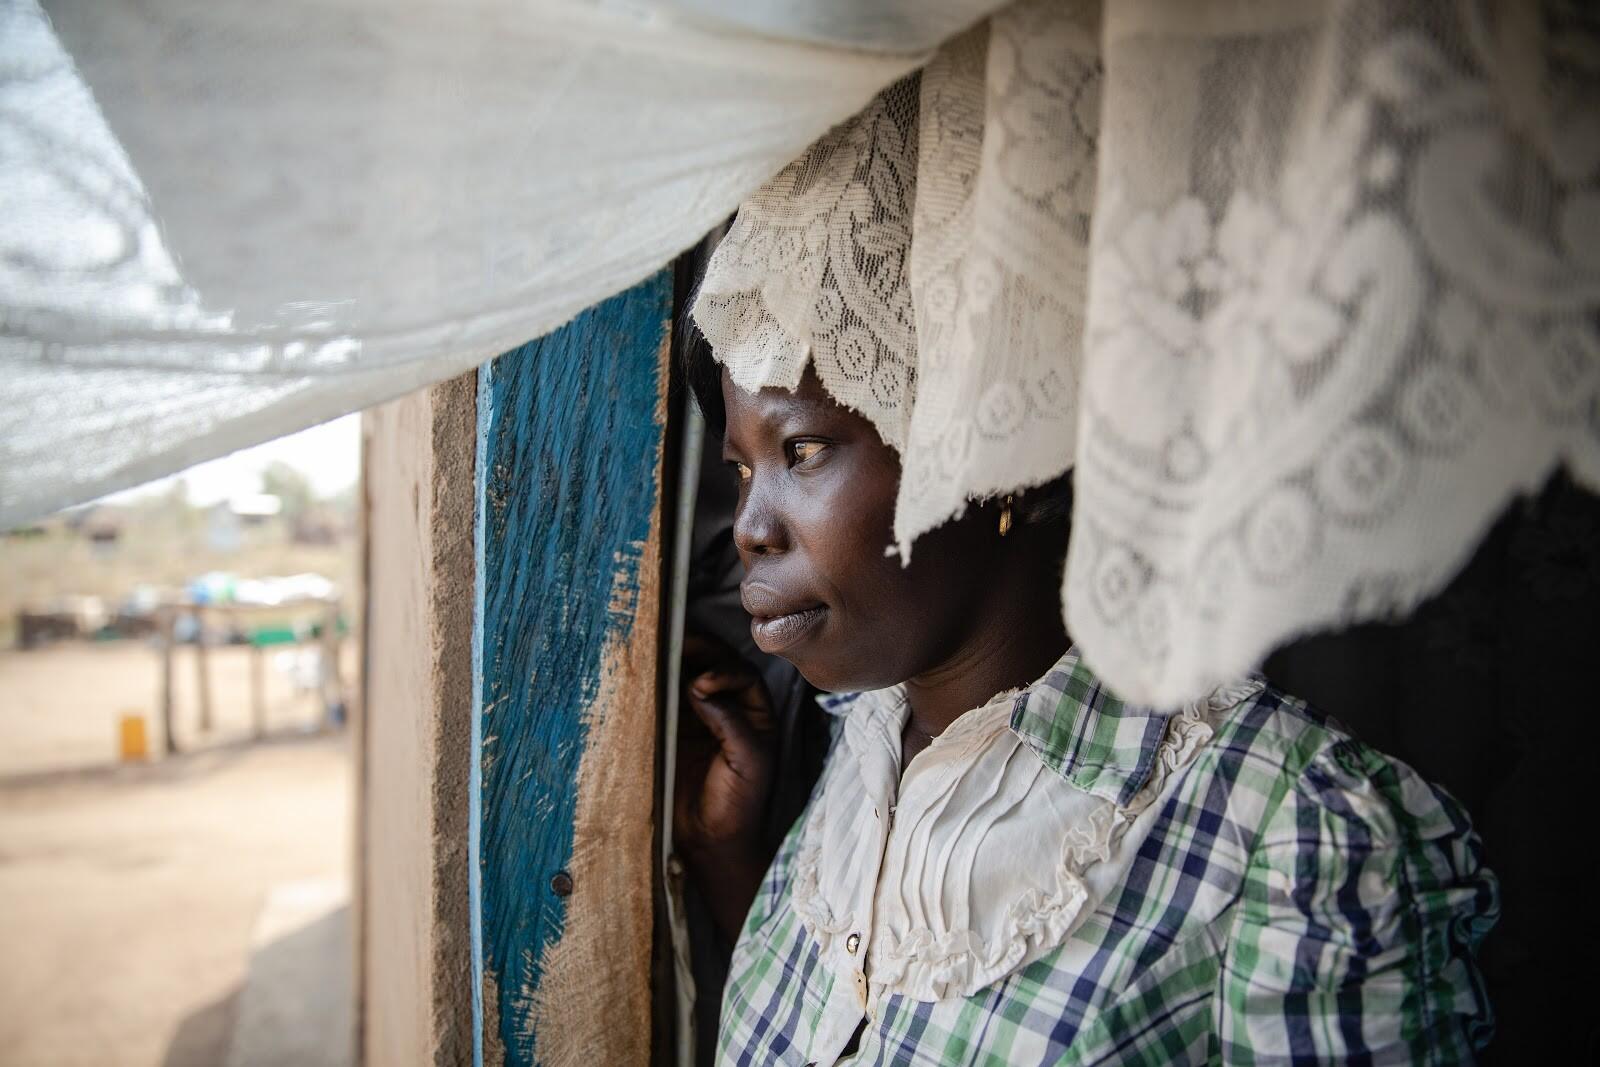 Foni Grace, an women’s rights activist, who is supported by the IRC looks out of her home in Bidi Bidi Camp in Uganda. IRC staff are now supporting her remotely via the phone.